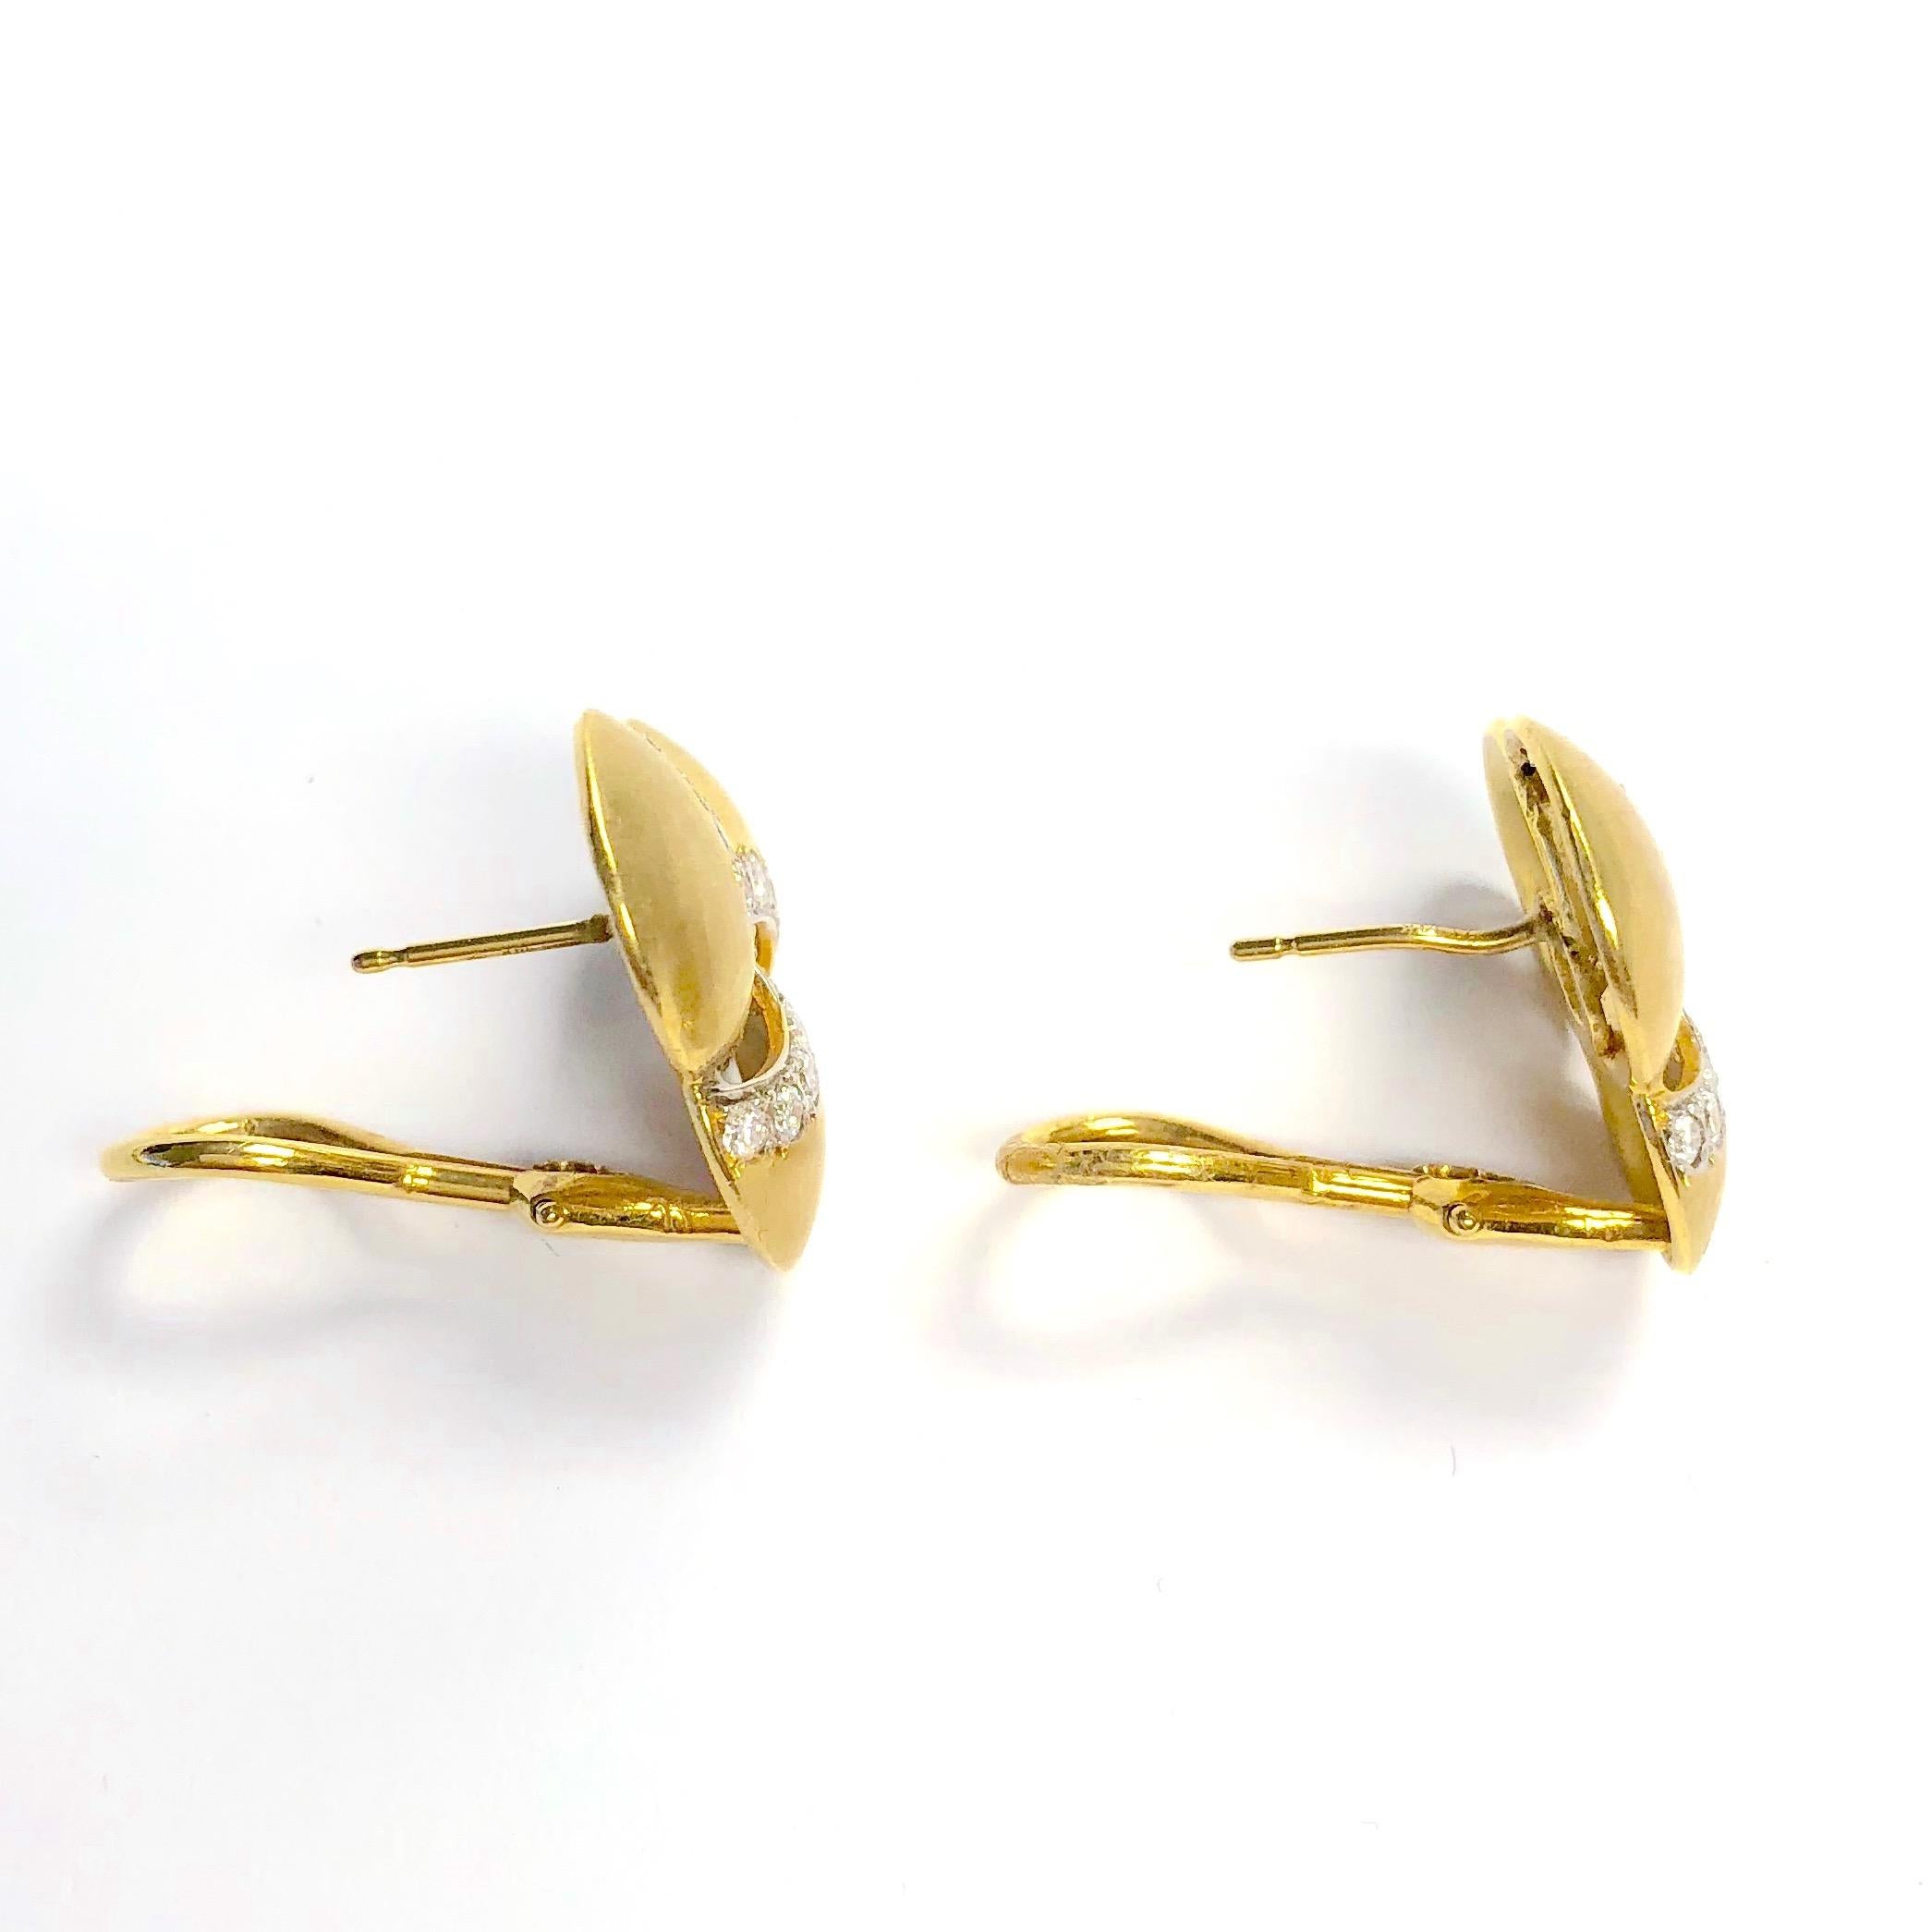 Classy 14K yellow gold and diamond earrings from California jewelry designer Esther Gallant. Satin finish, post and omega backs for extra security. Each earring measures 11/16